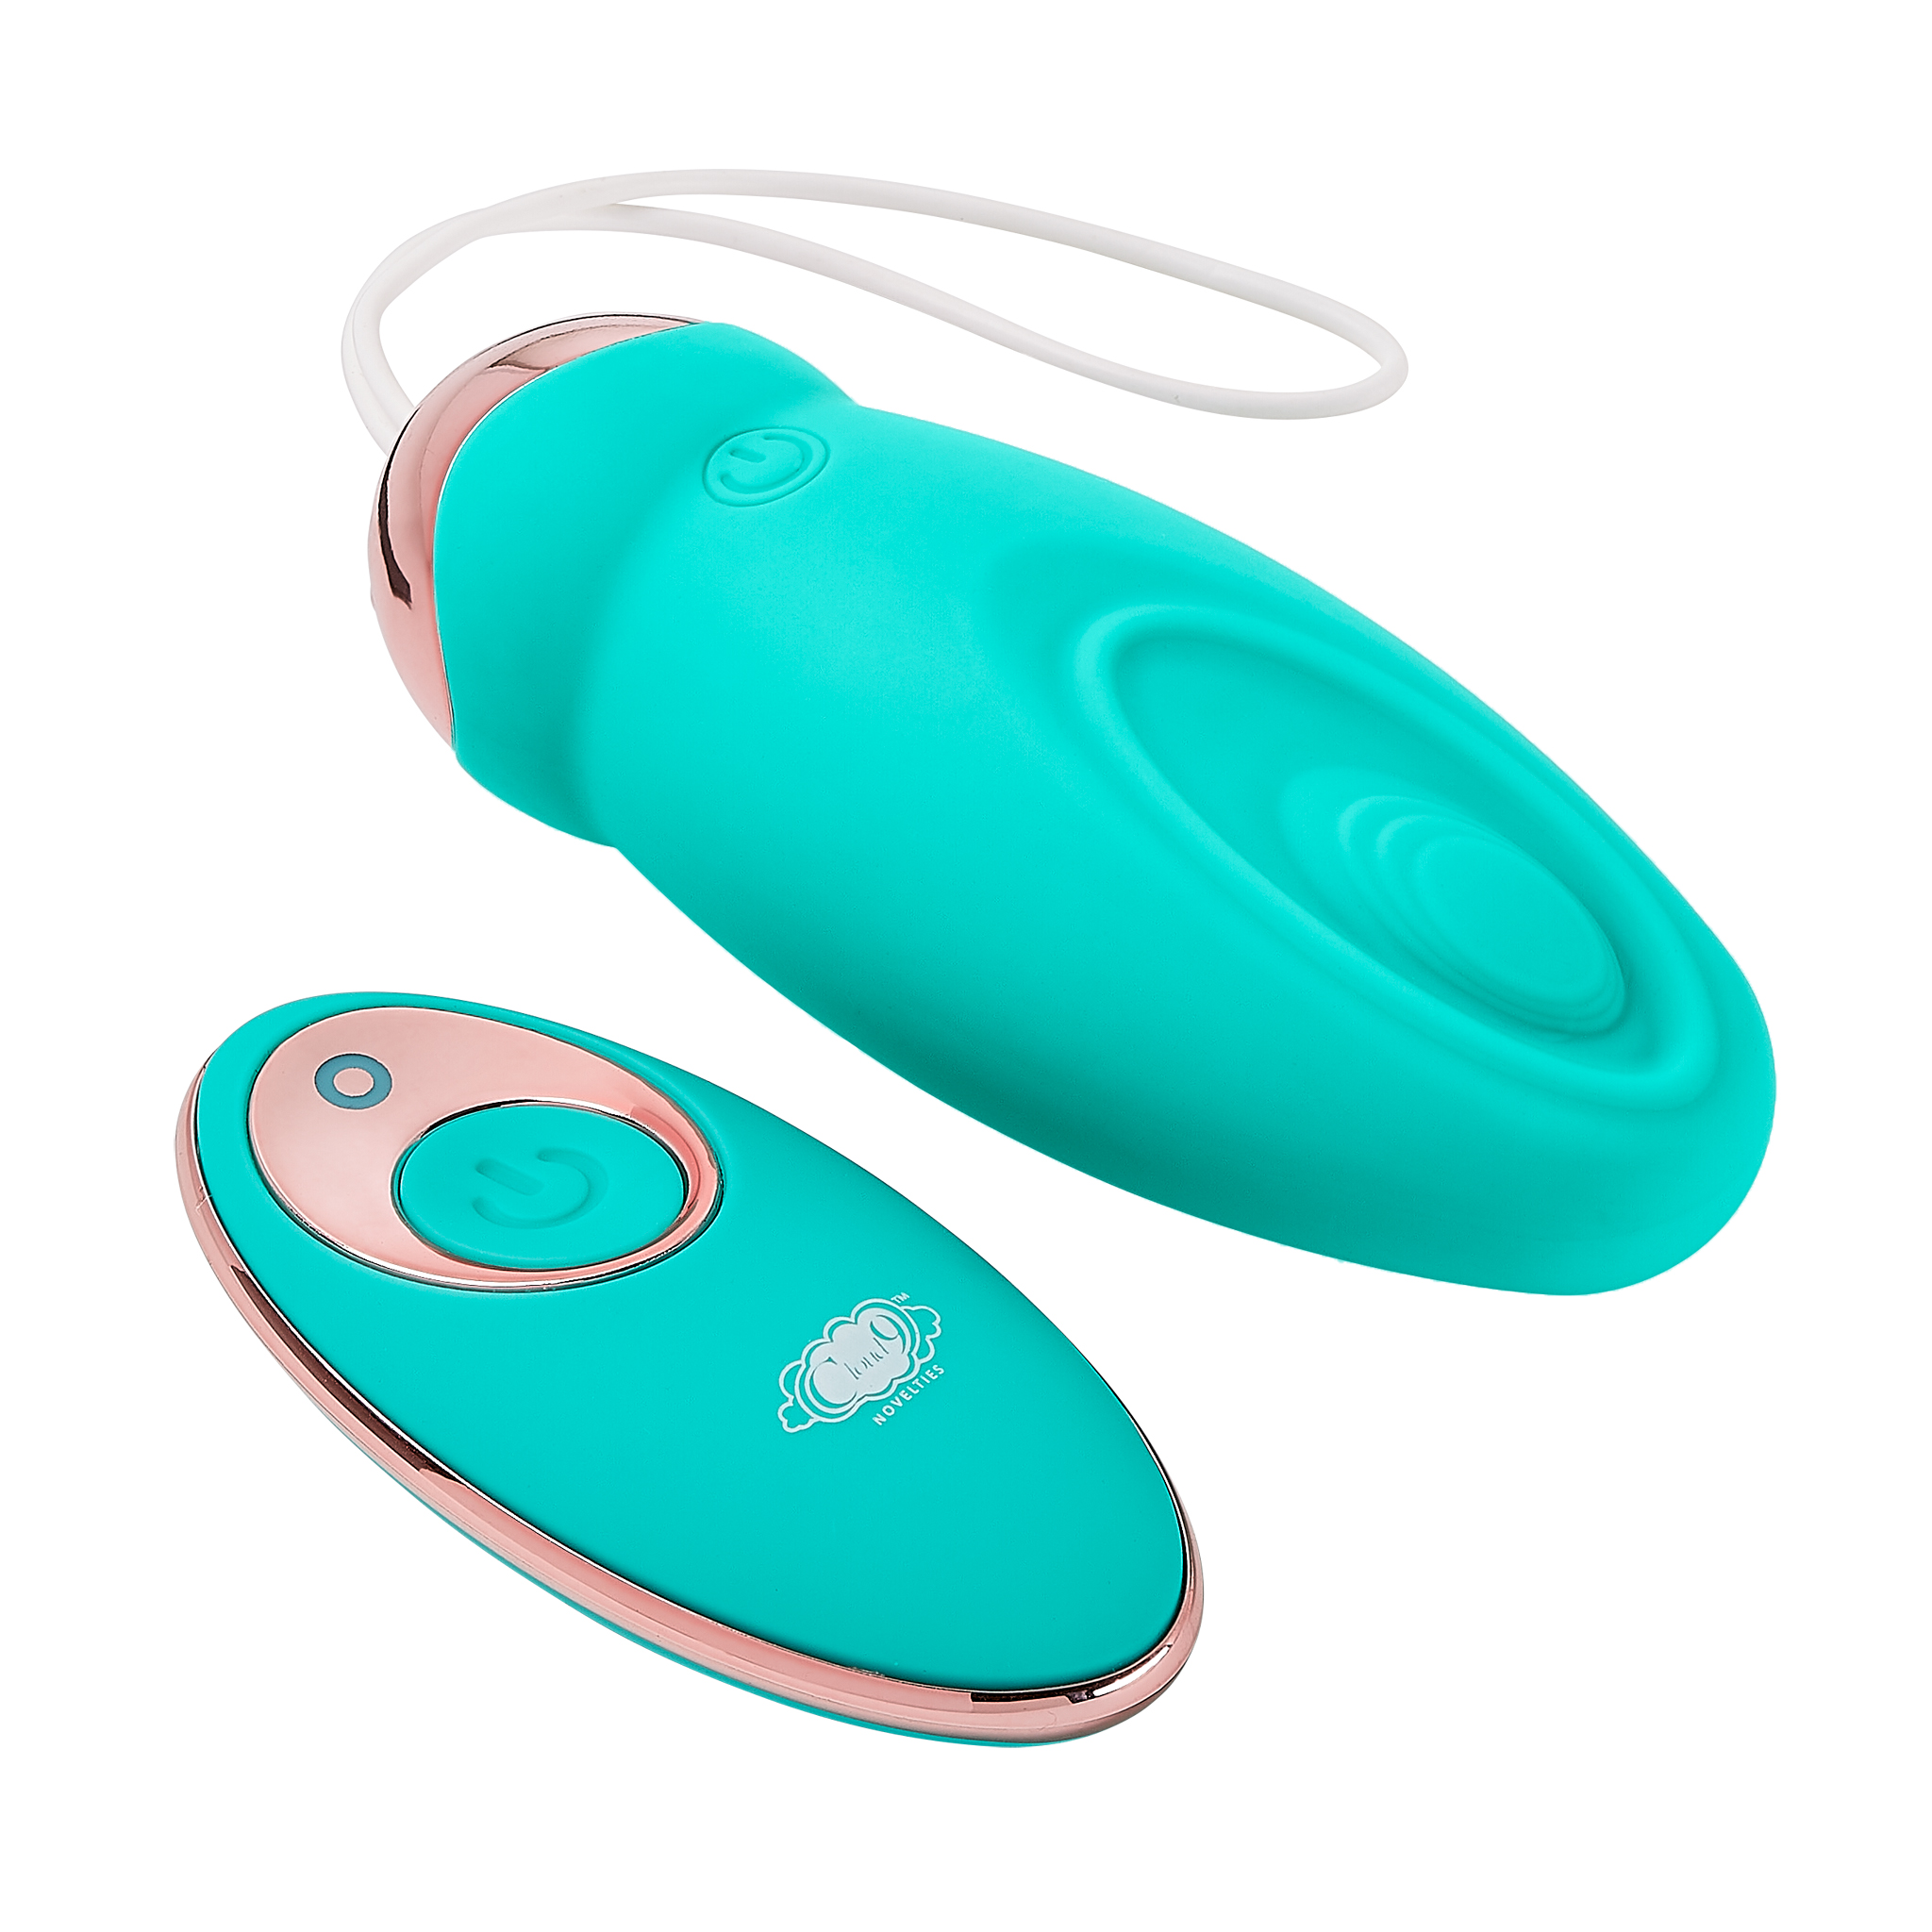 CLOUD 9 HEALTH & WELLNESS WIRELESS REMOTE CONTROL EGG W/ PULSATING MOTION TEAL - Click Image to Close